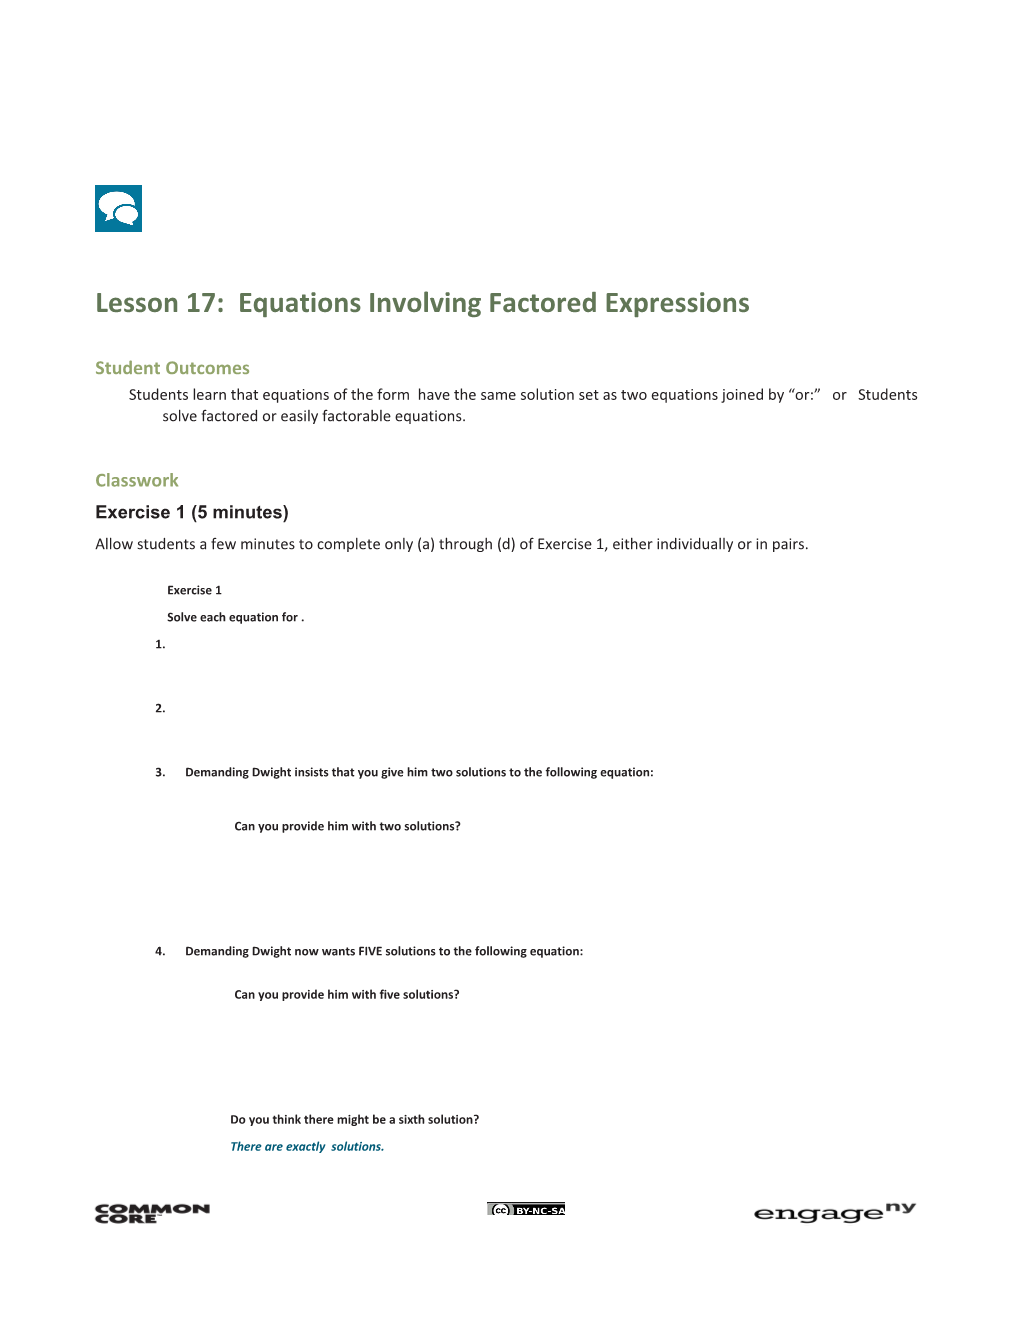 Lesson 17: Equations Involving Factored Expressions